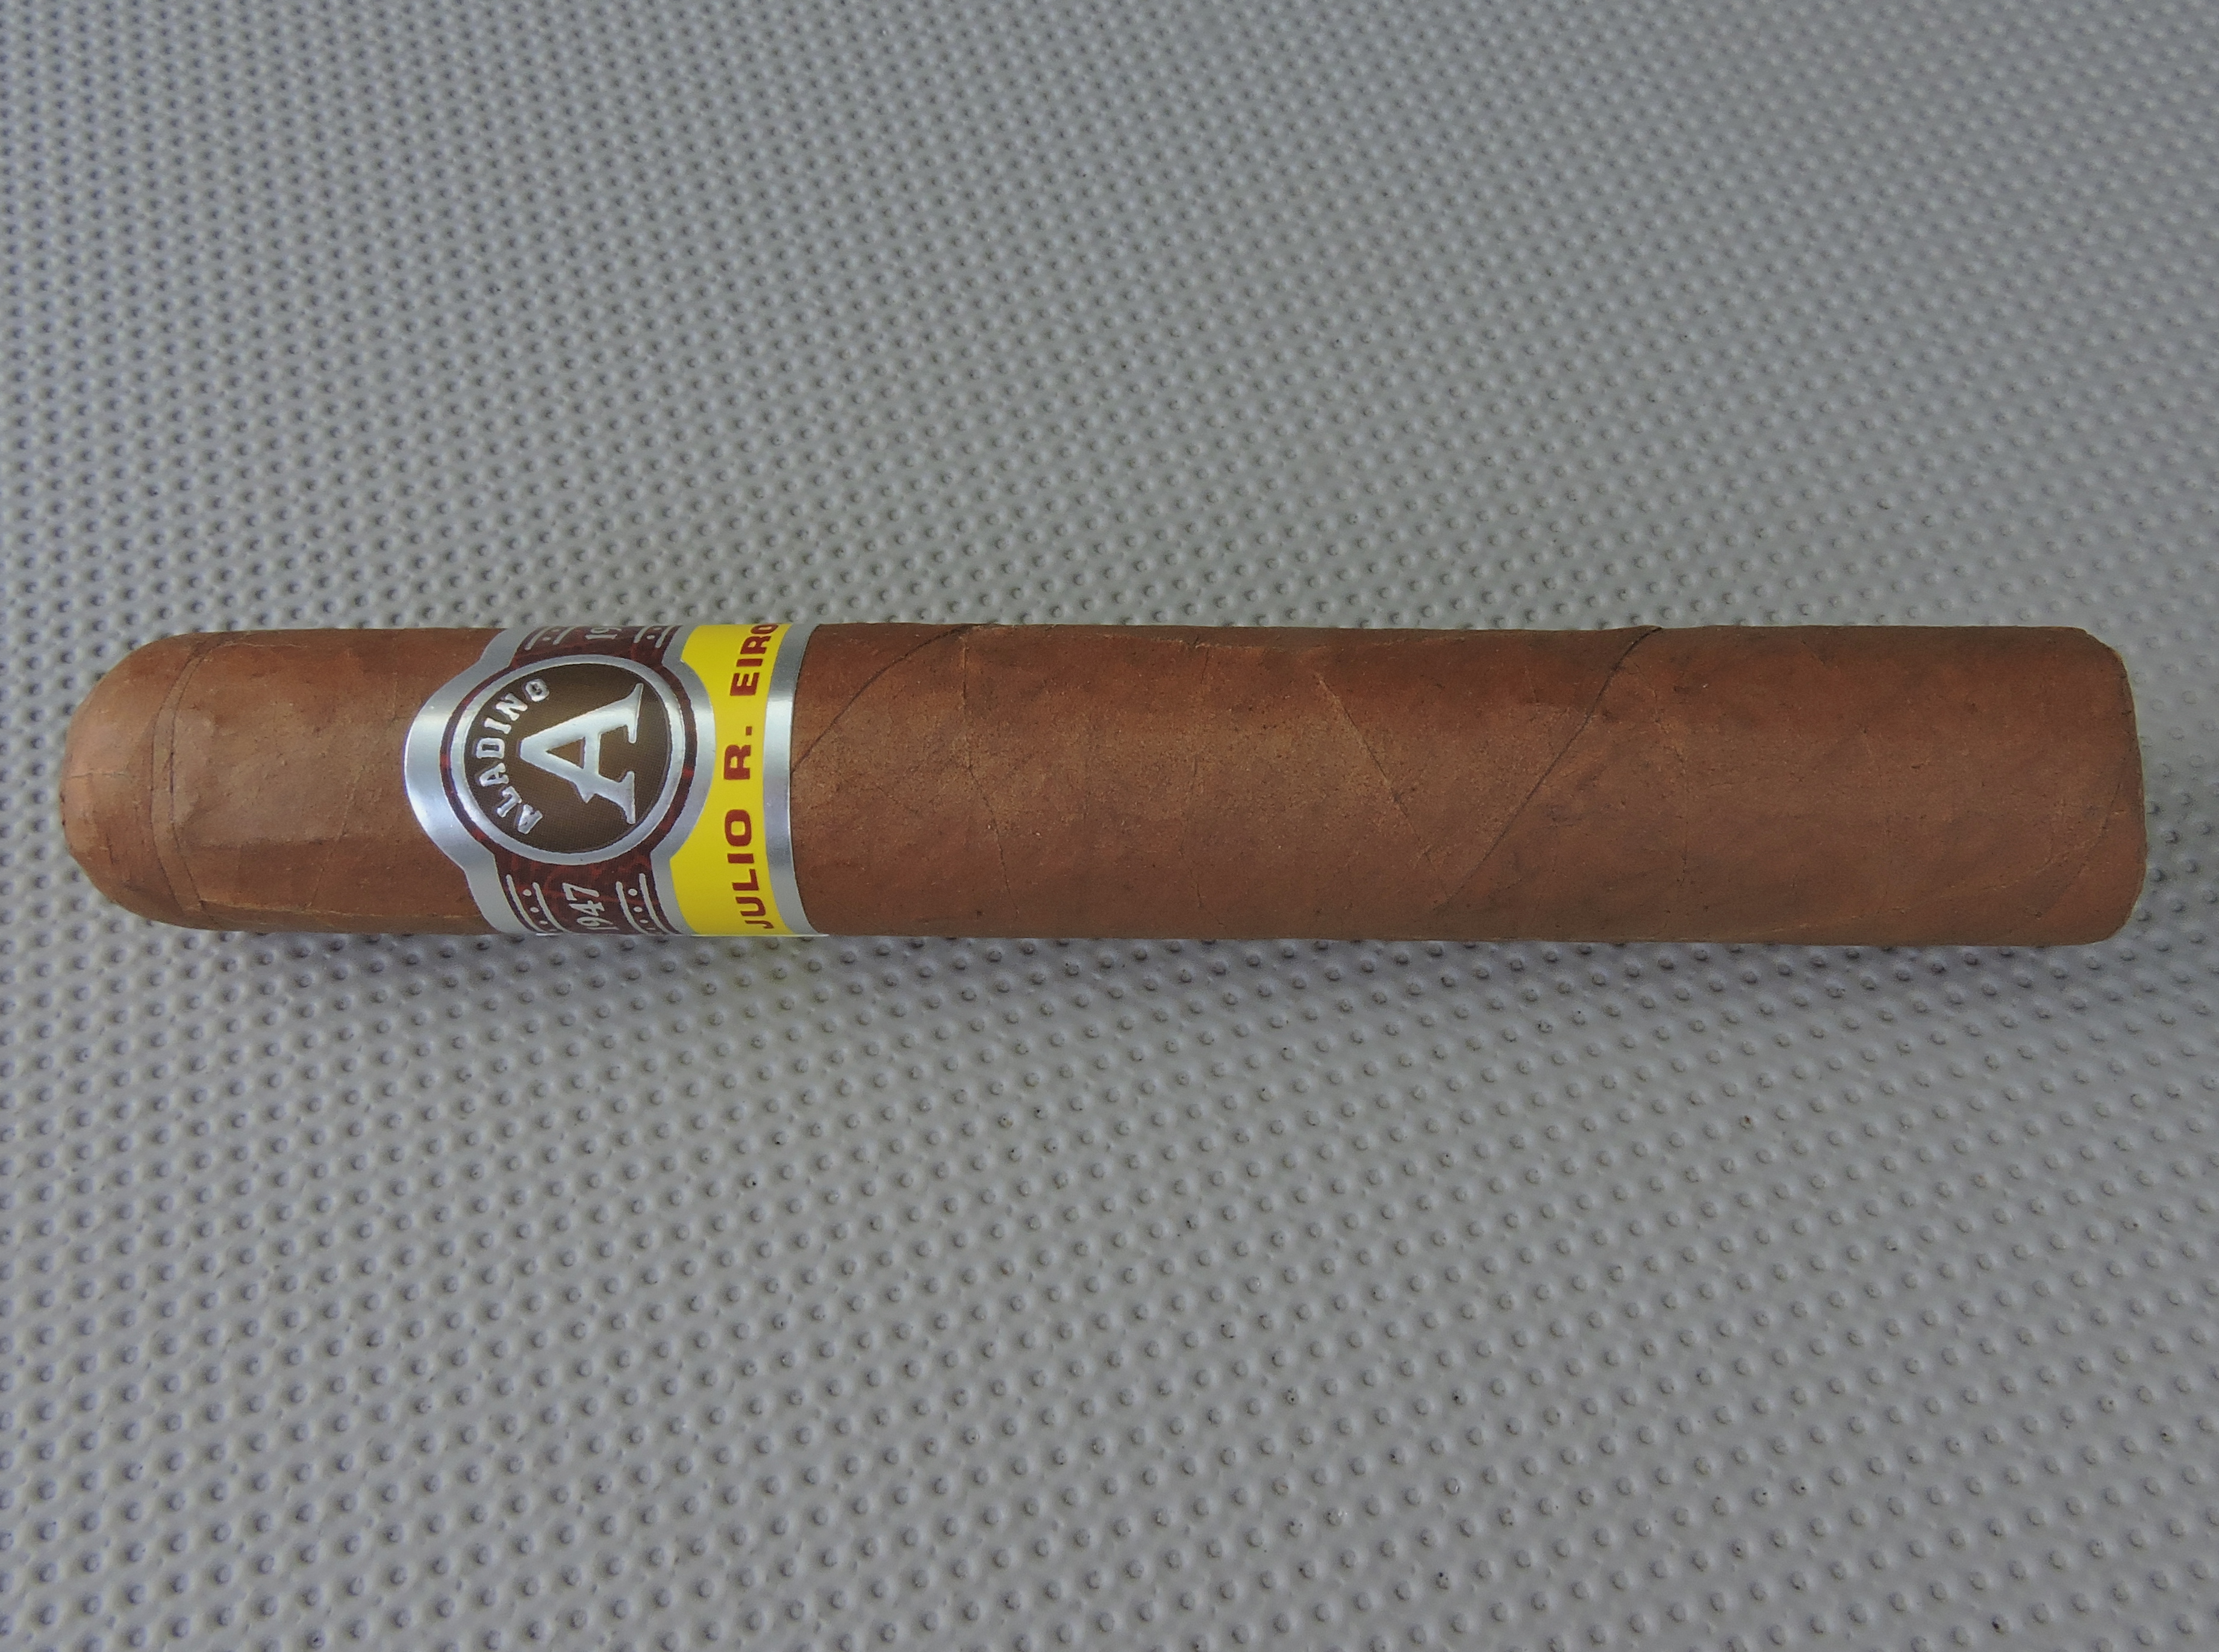 Aladino Robusto by JRE Tobacco Co